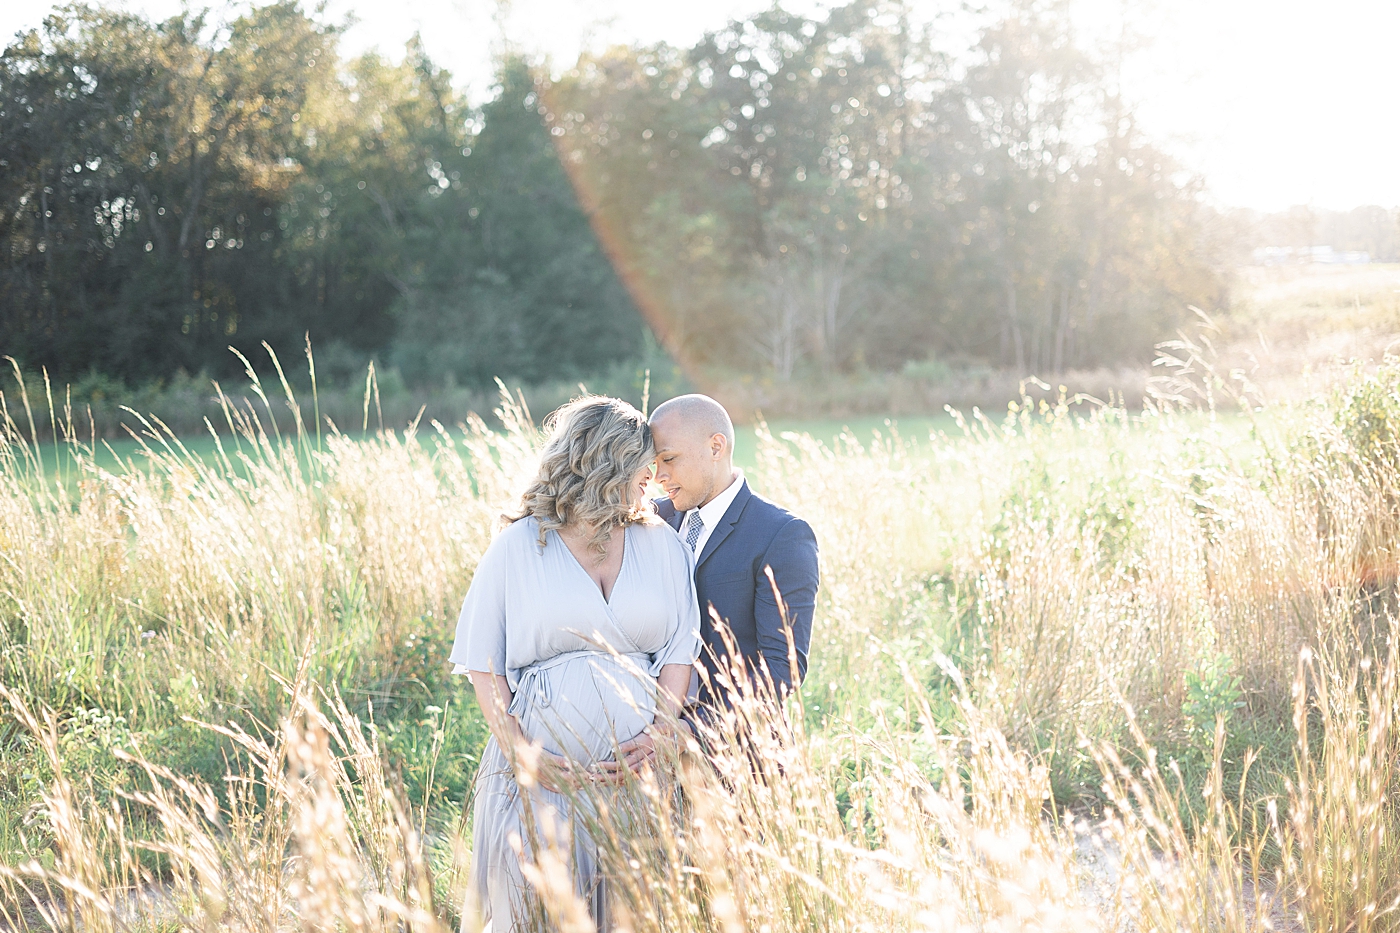 Mom and dad to be in a golden field | Photo by Gulfport MS Maternity and Newborn Photographer Little Sunshine Photography 